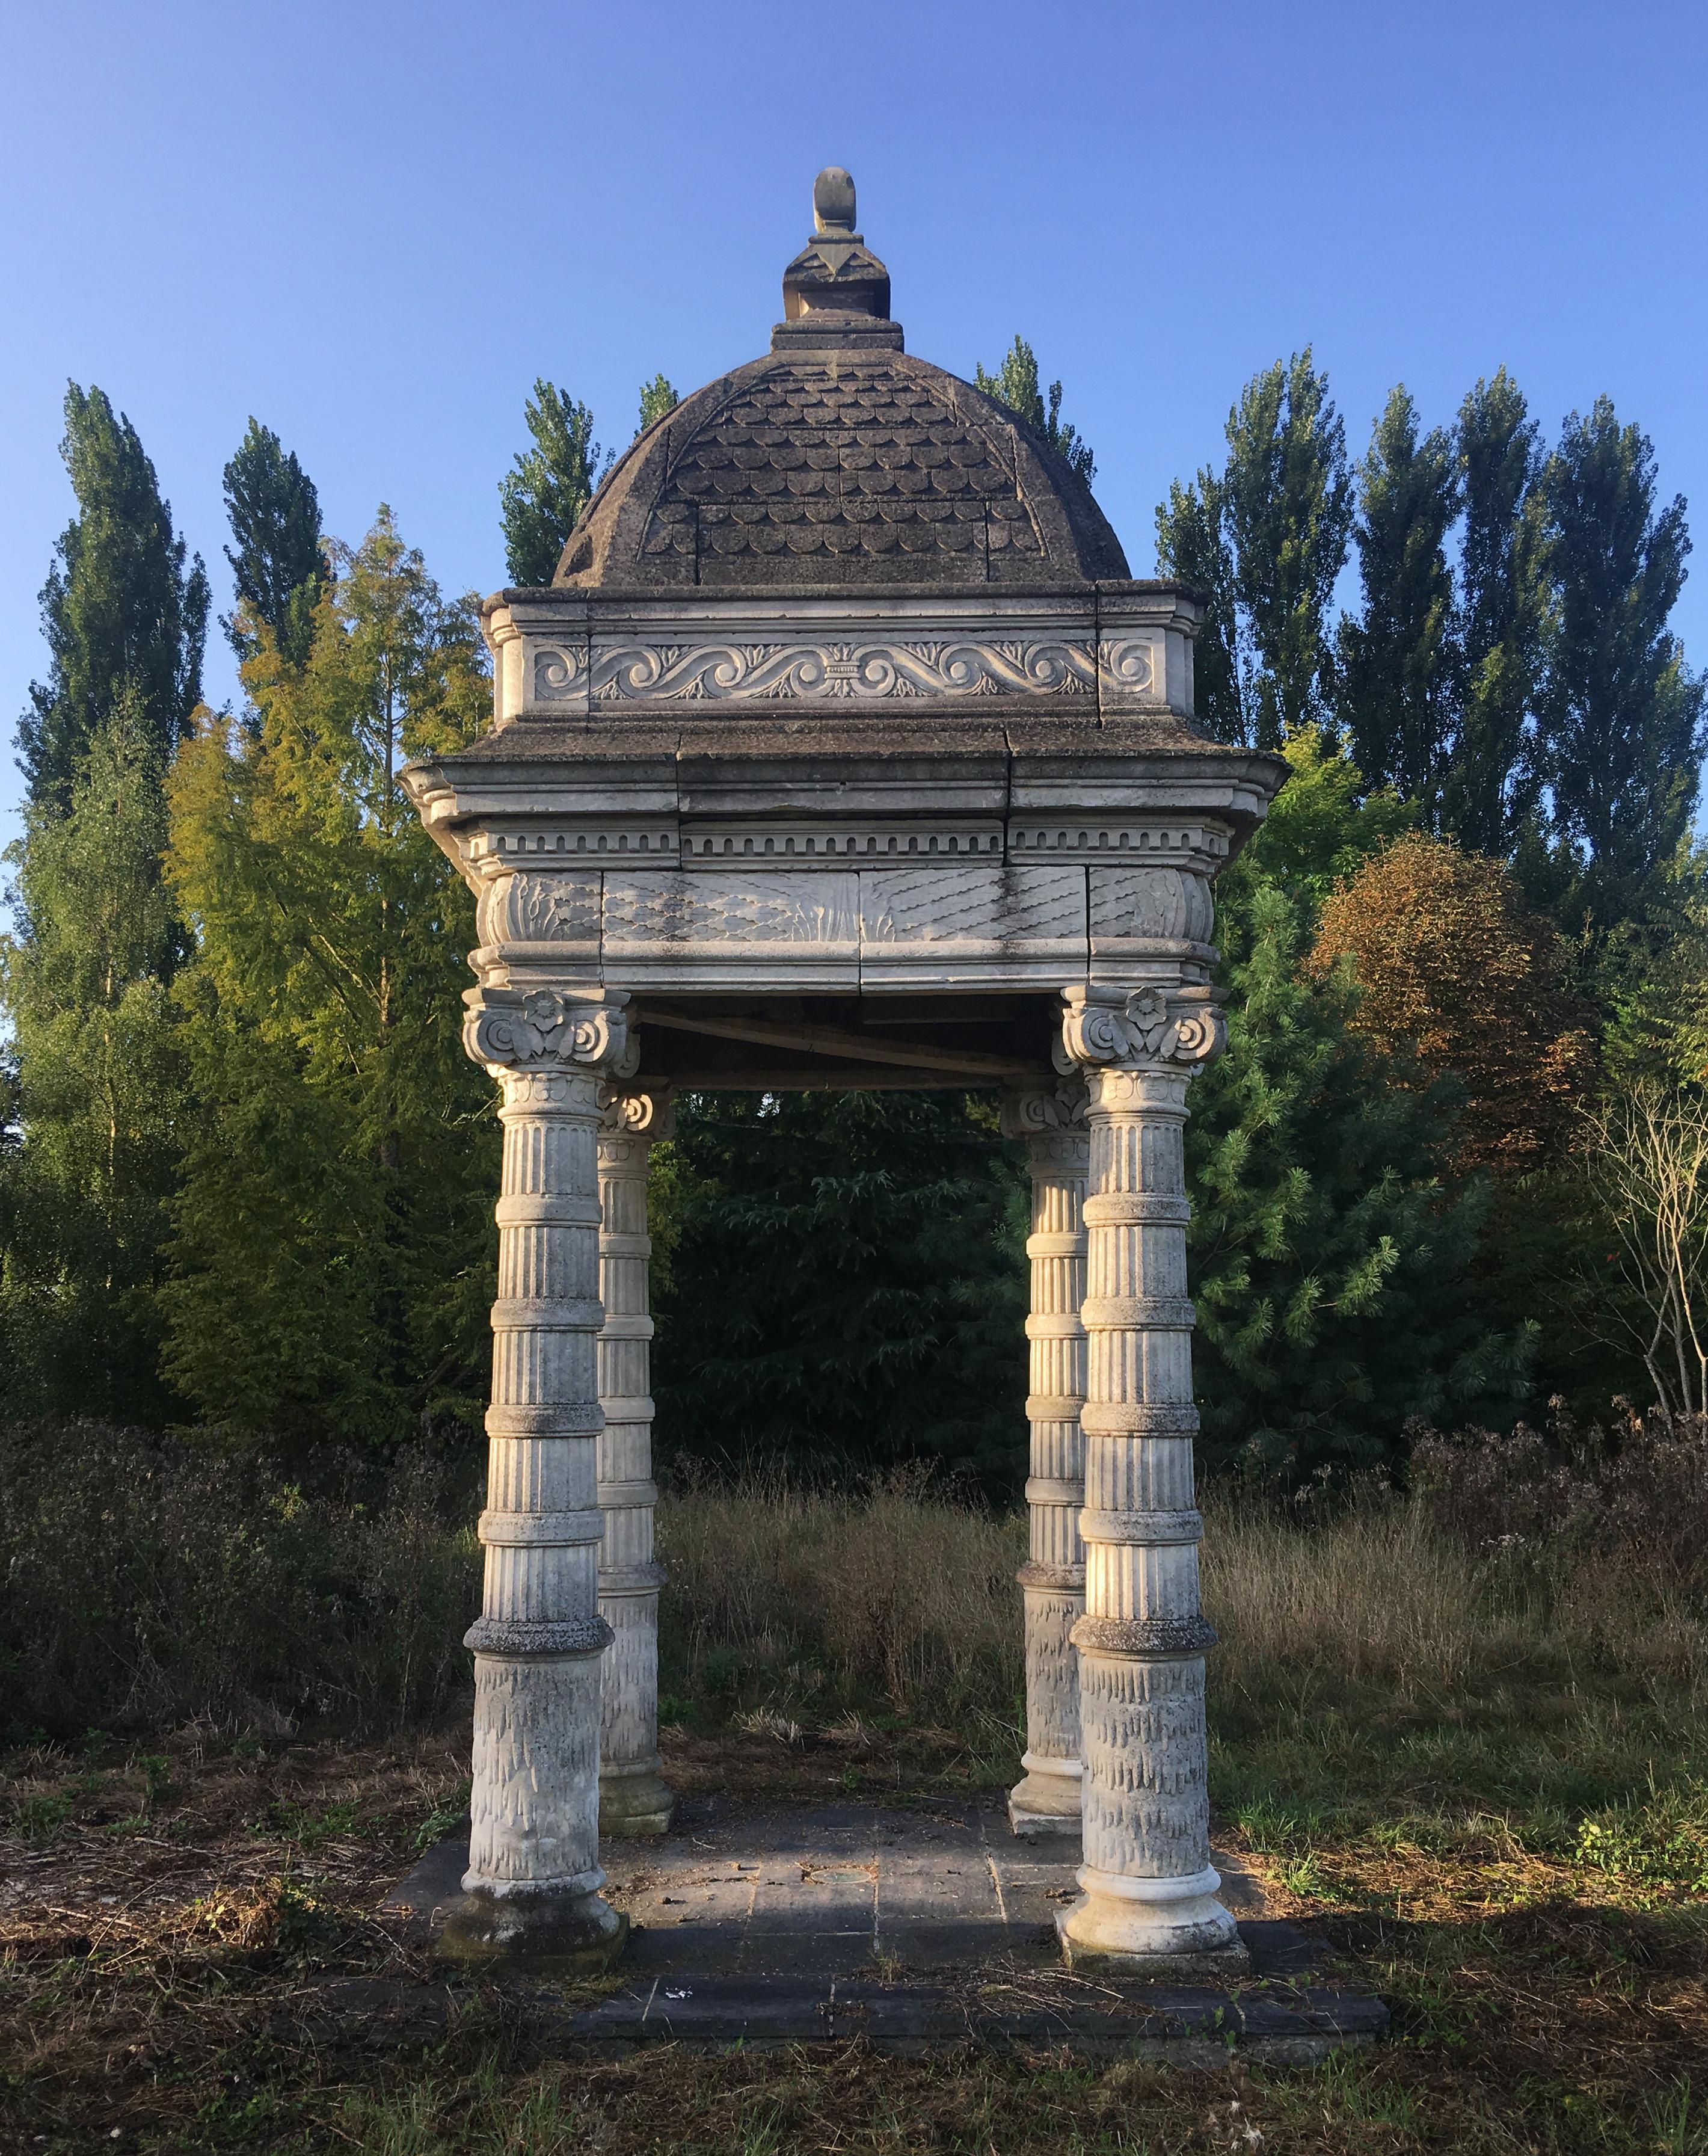 This monumental stone fountain canopy was made identical to the fountain of the Chateau of the Black Prince in Lormont. Dated from the 20th century, four columns with grooved barrels crowned with ionic capitals with flowers and stylized foliage are